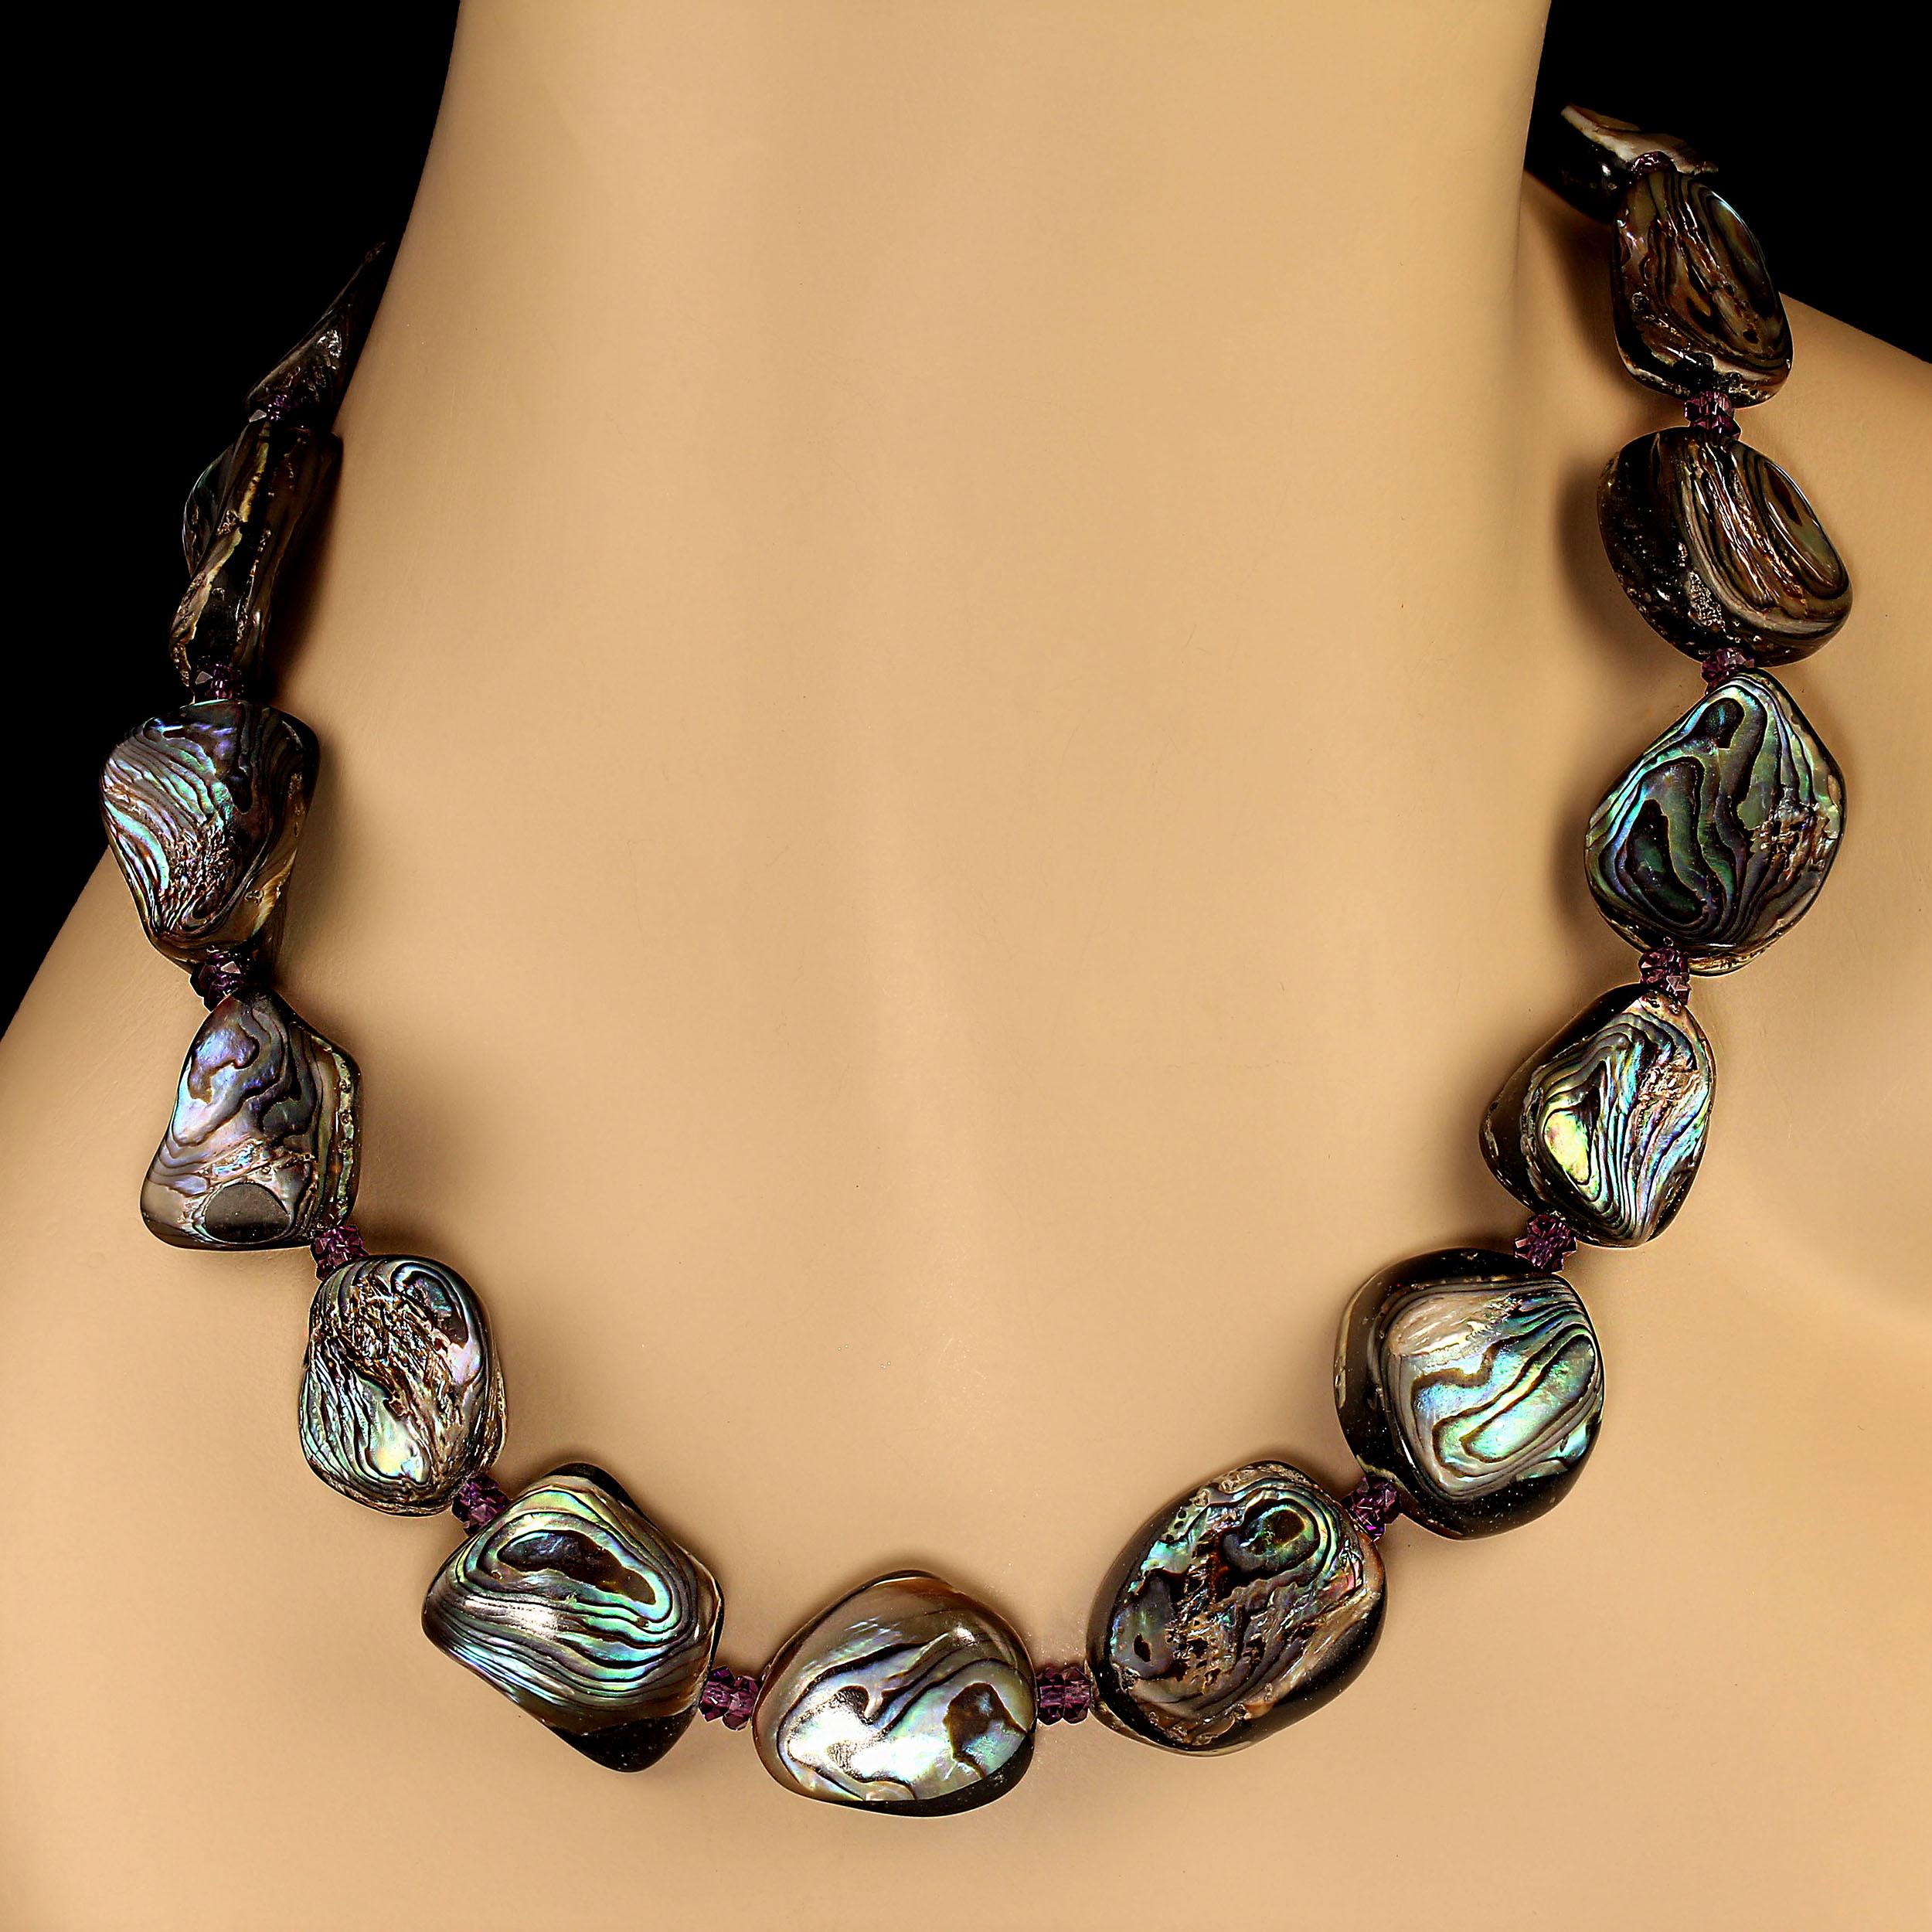 Organic shapes of double-sided abalone shell accented with sparkling amethyst necklace. This dramatic 24-inch necklace is light weight and sits beautifully at the neckline.  The abalone shell iridesces with shades of green, blue, and purple. The